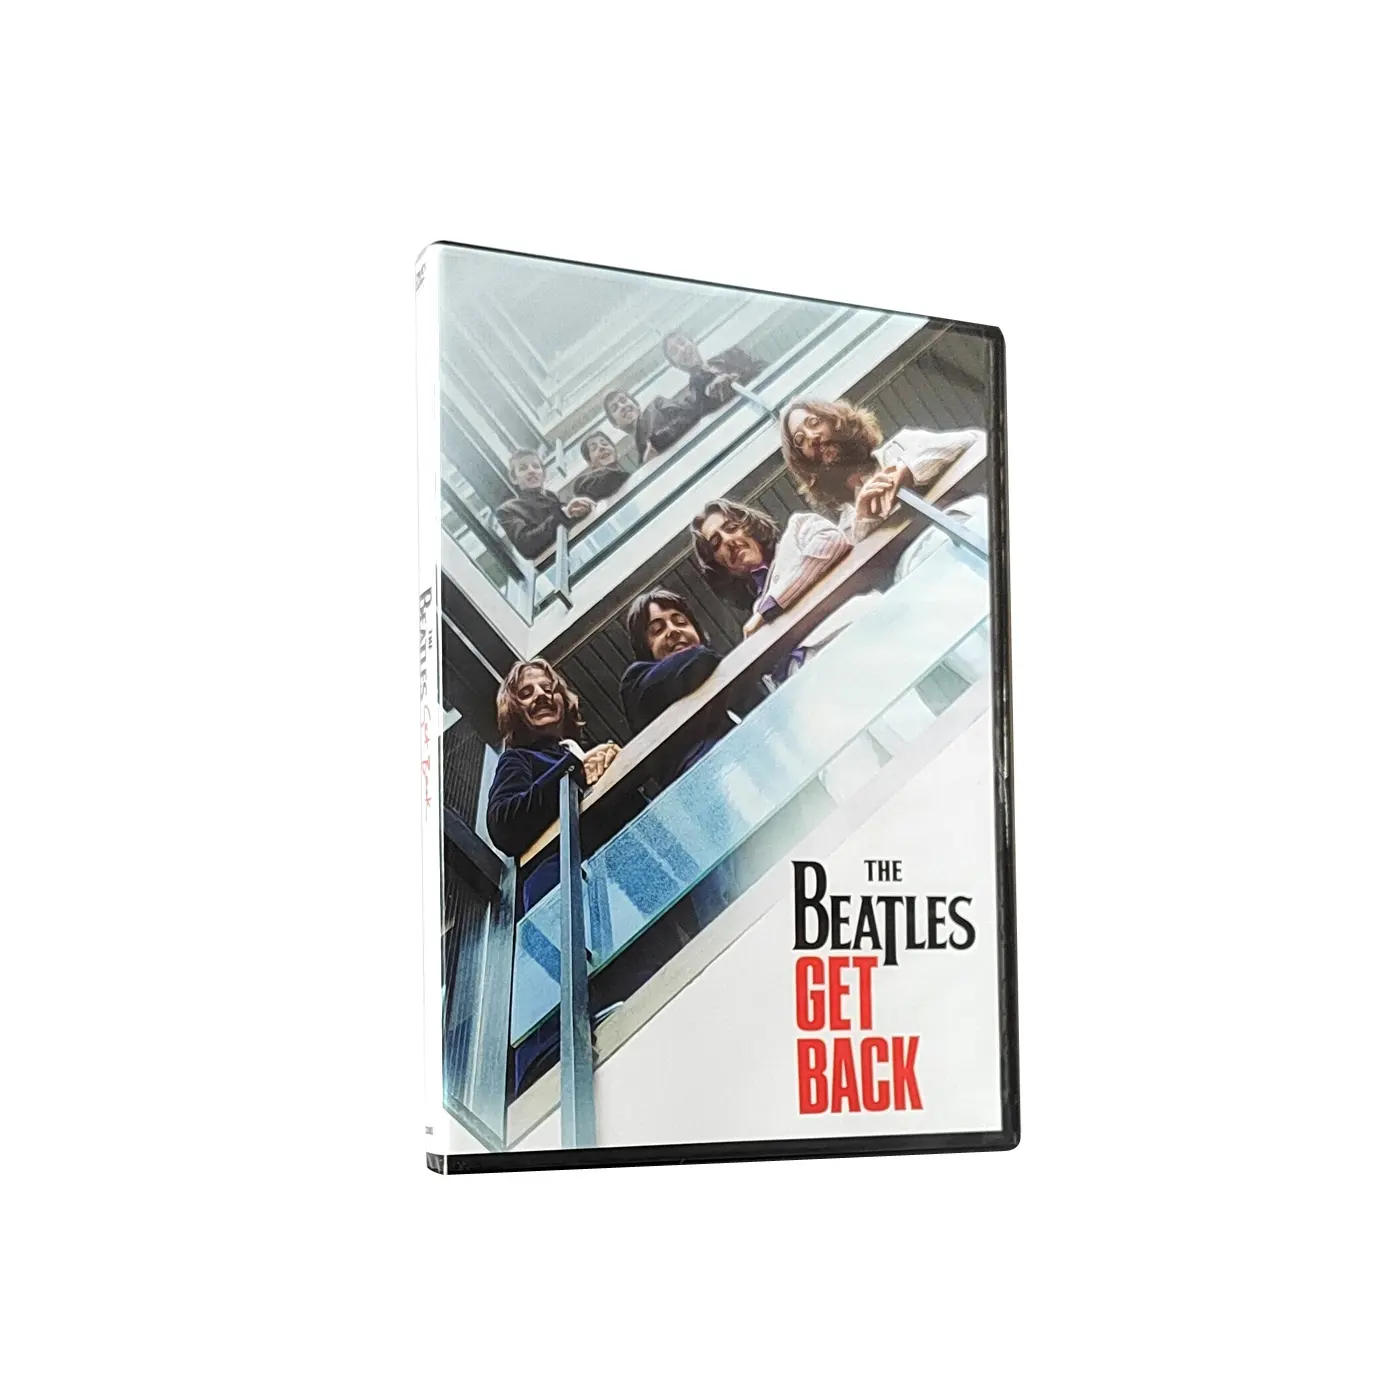 Buy NEW china free shipping factory DVD BOXED SETS MOVIE Film Disk Duplication Printing TV SHOW The Beatles Get Back 3DISC